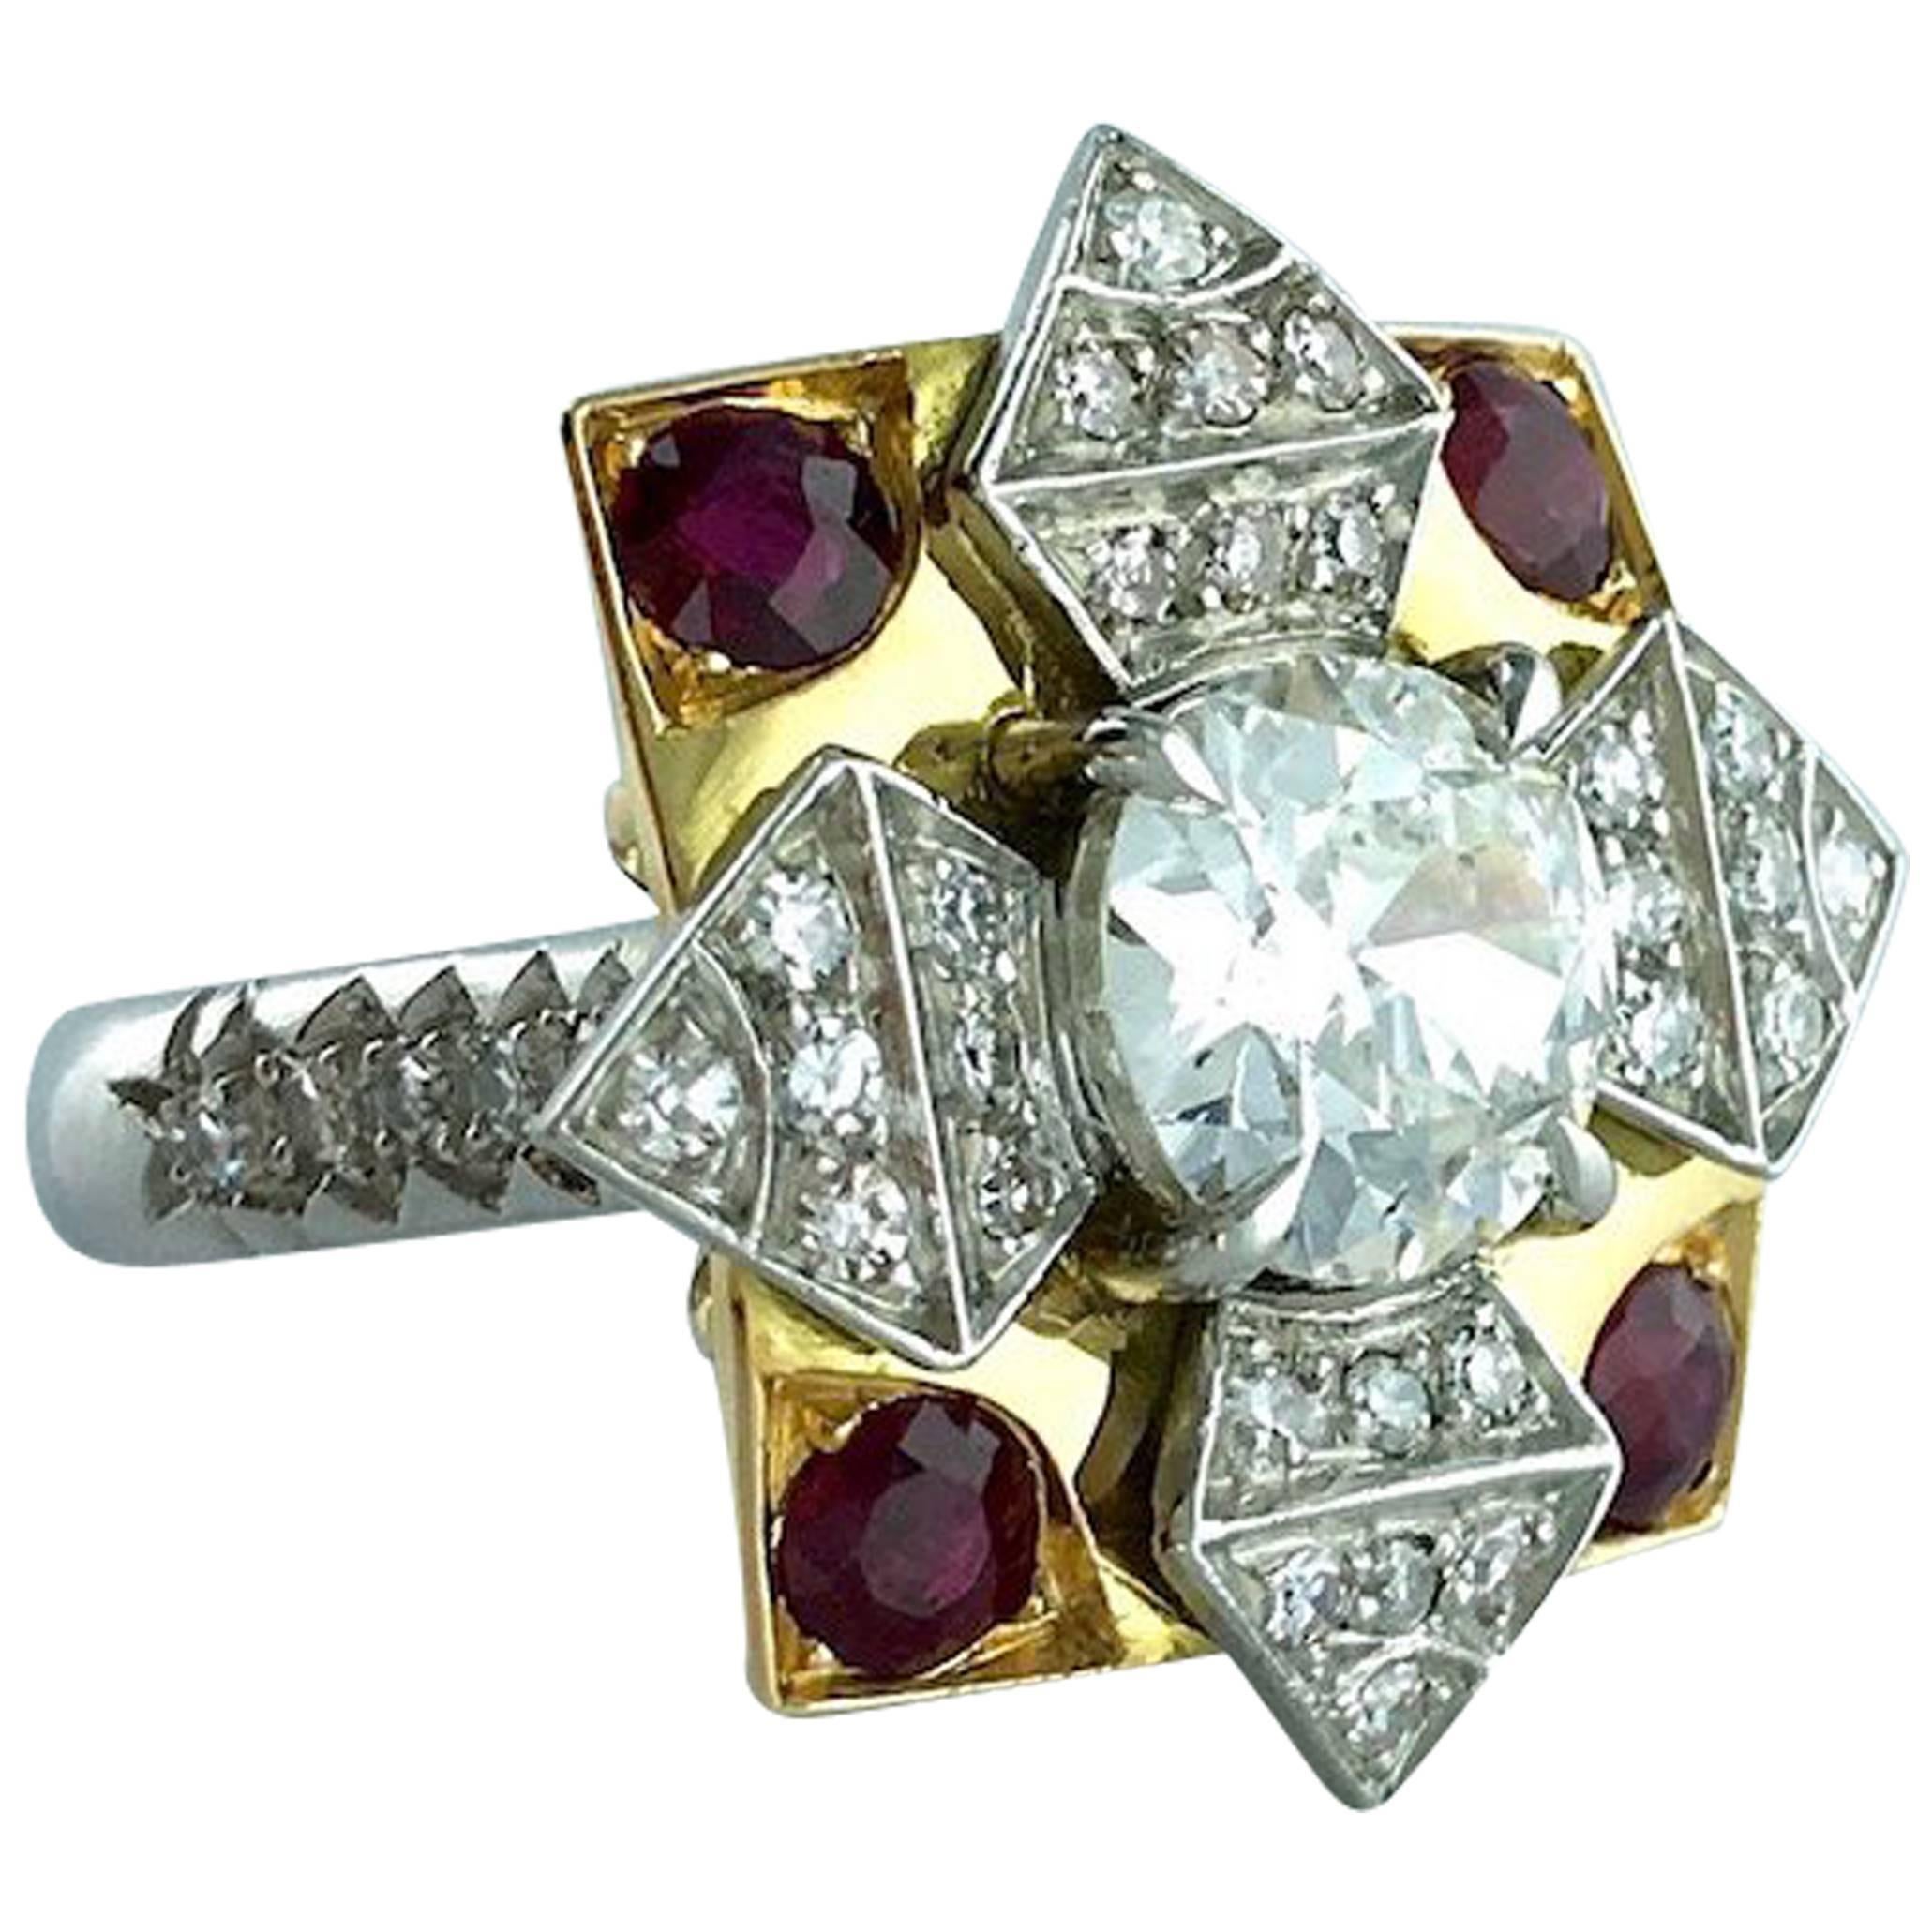 Stylized Flower star platinum and yellow gold 18k 75 ring centered by a round diamond weighting 2.05 carats and surrounded by diamond and ruby.

French assay marks.
Gross weight: 12.90 grams.